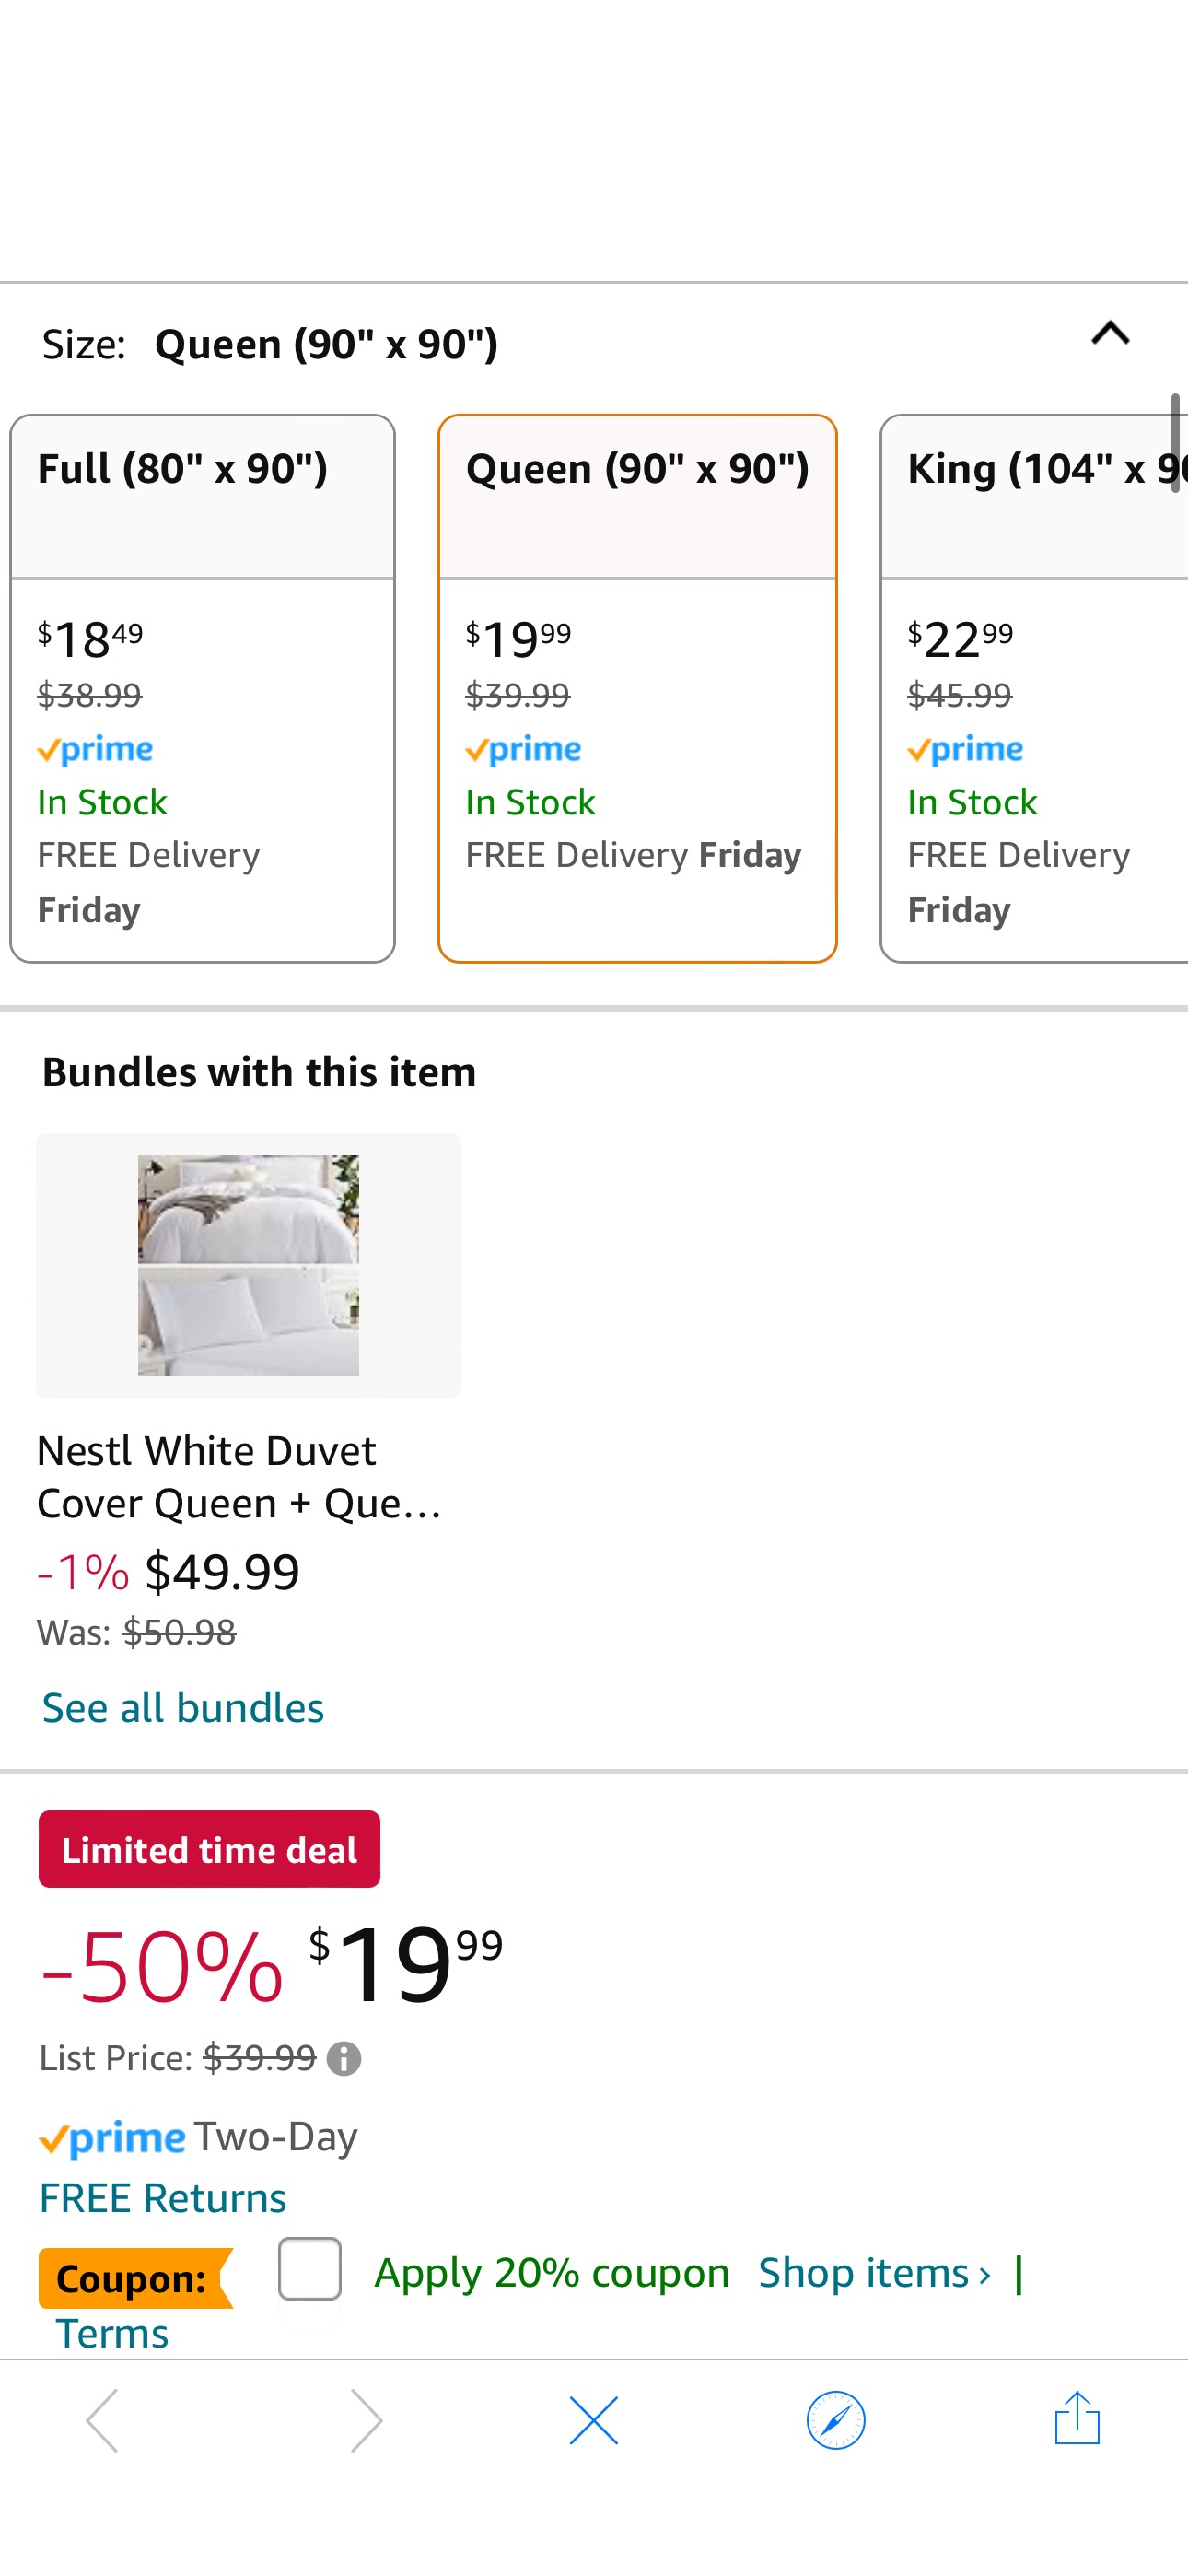 Amazon.com: Nestl White Duvet Cover Queen Size - Soft Double Brushed Queen Duvet Cover Set, 3 Piece, with Button Closure, 1 Duvet Cover 90x90 inches and 2 Pillow Shams :coupon